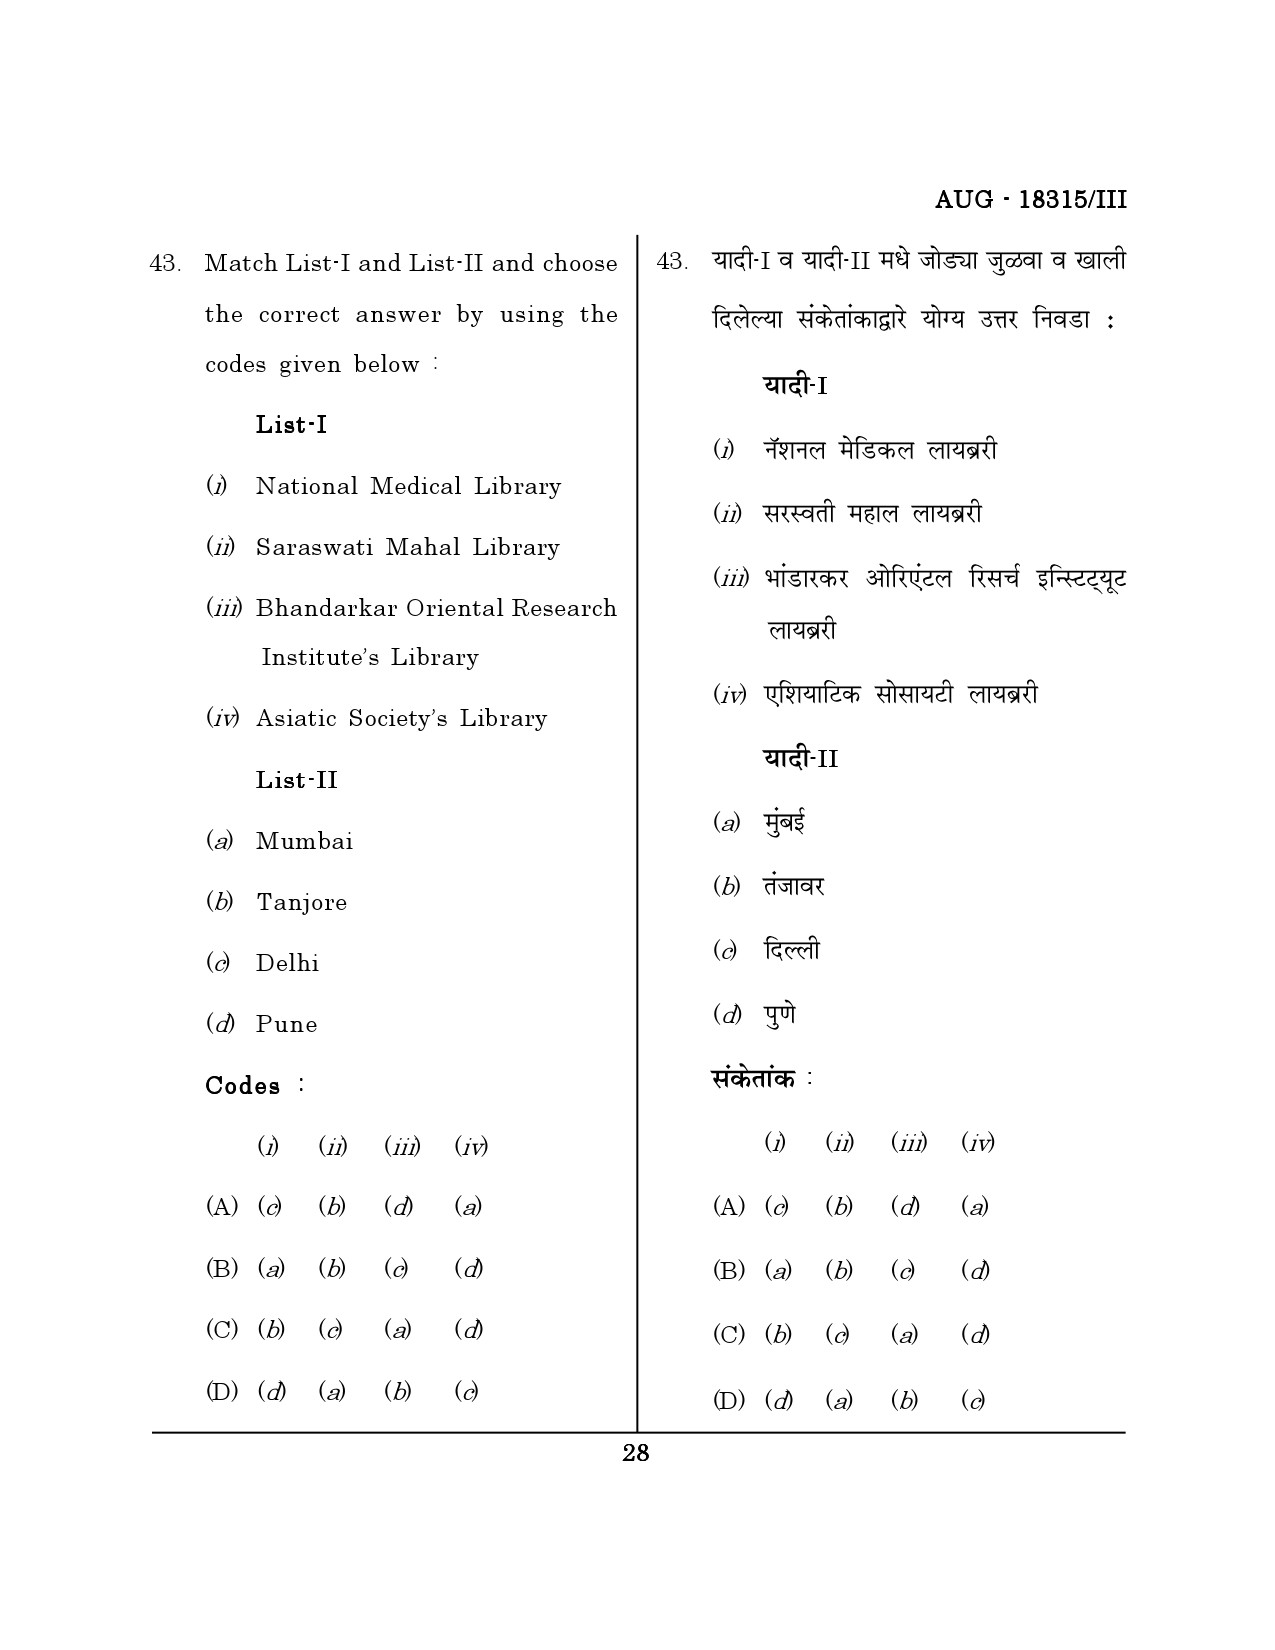 Maharashtra SET Library Information Science Question Paper III August 2015 27